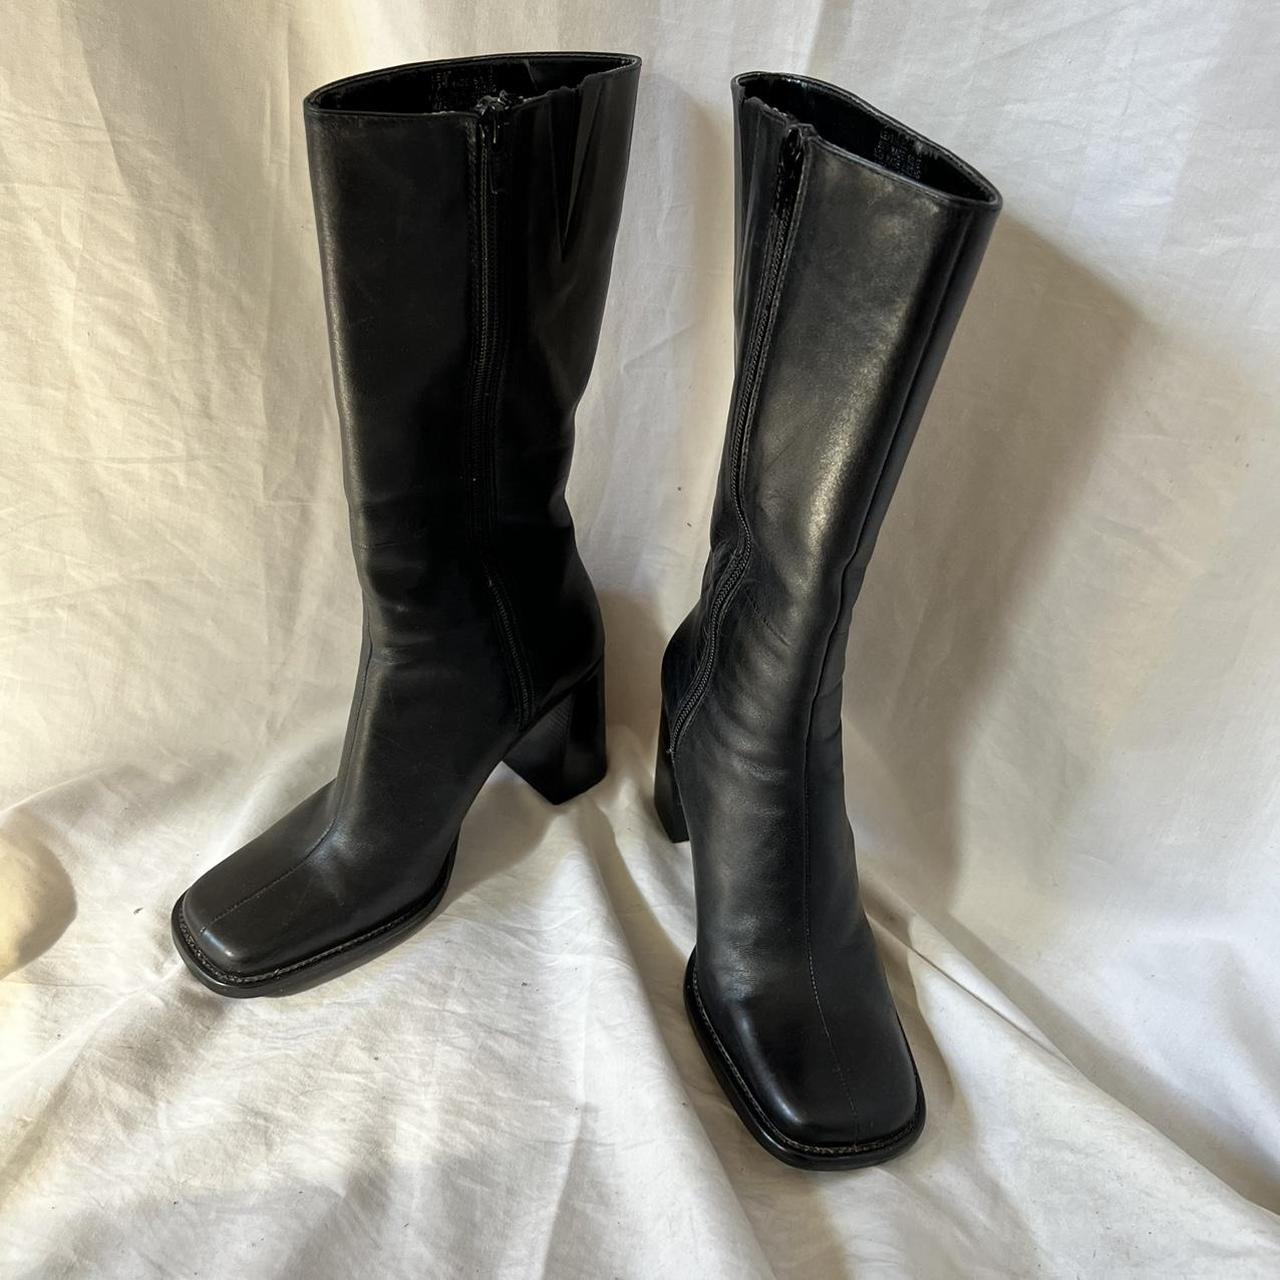 Vintage black leather mid calf boots with square... - Depop